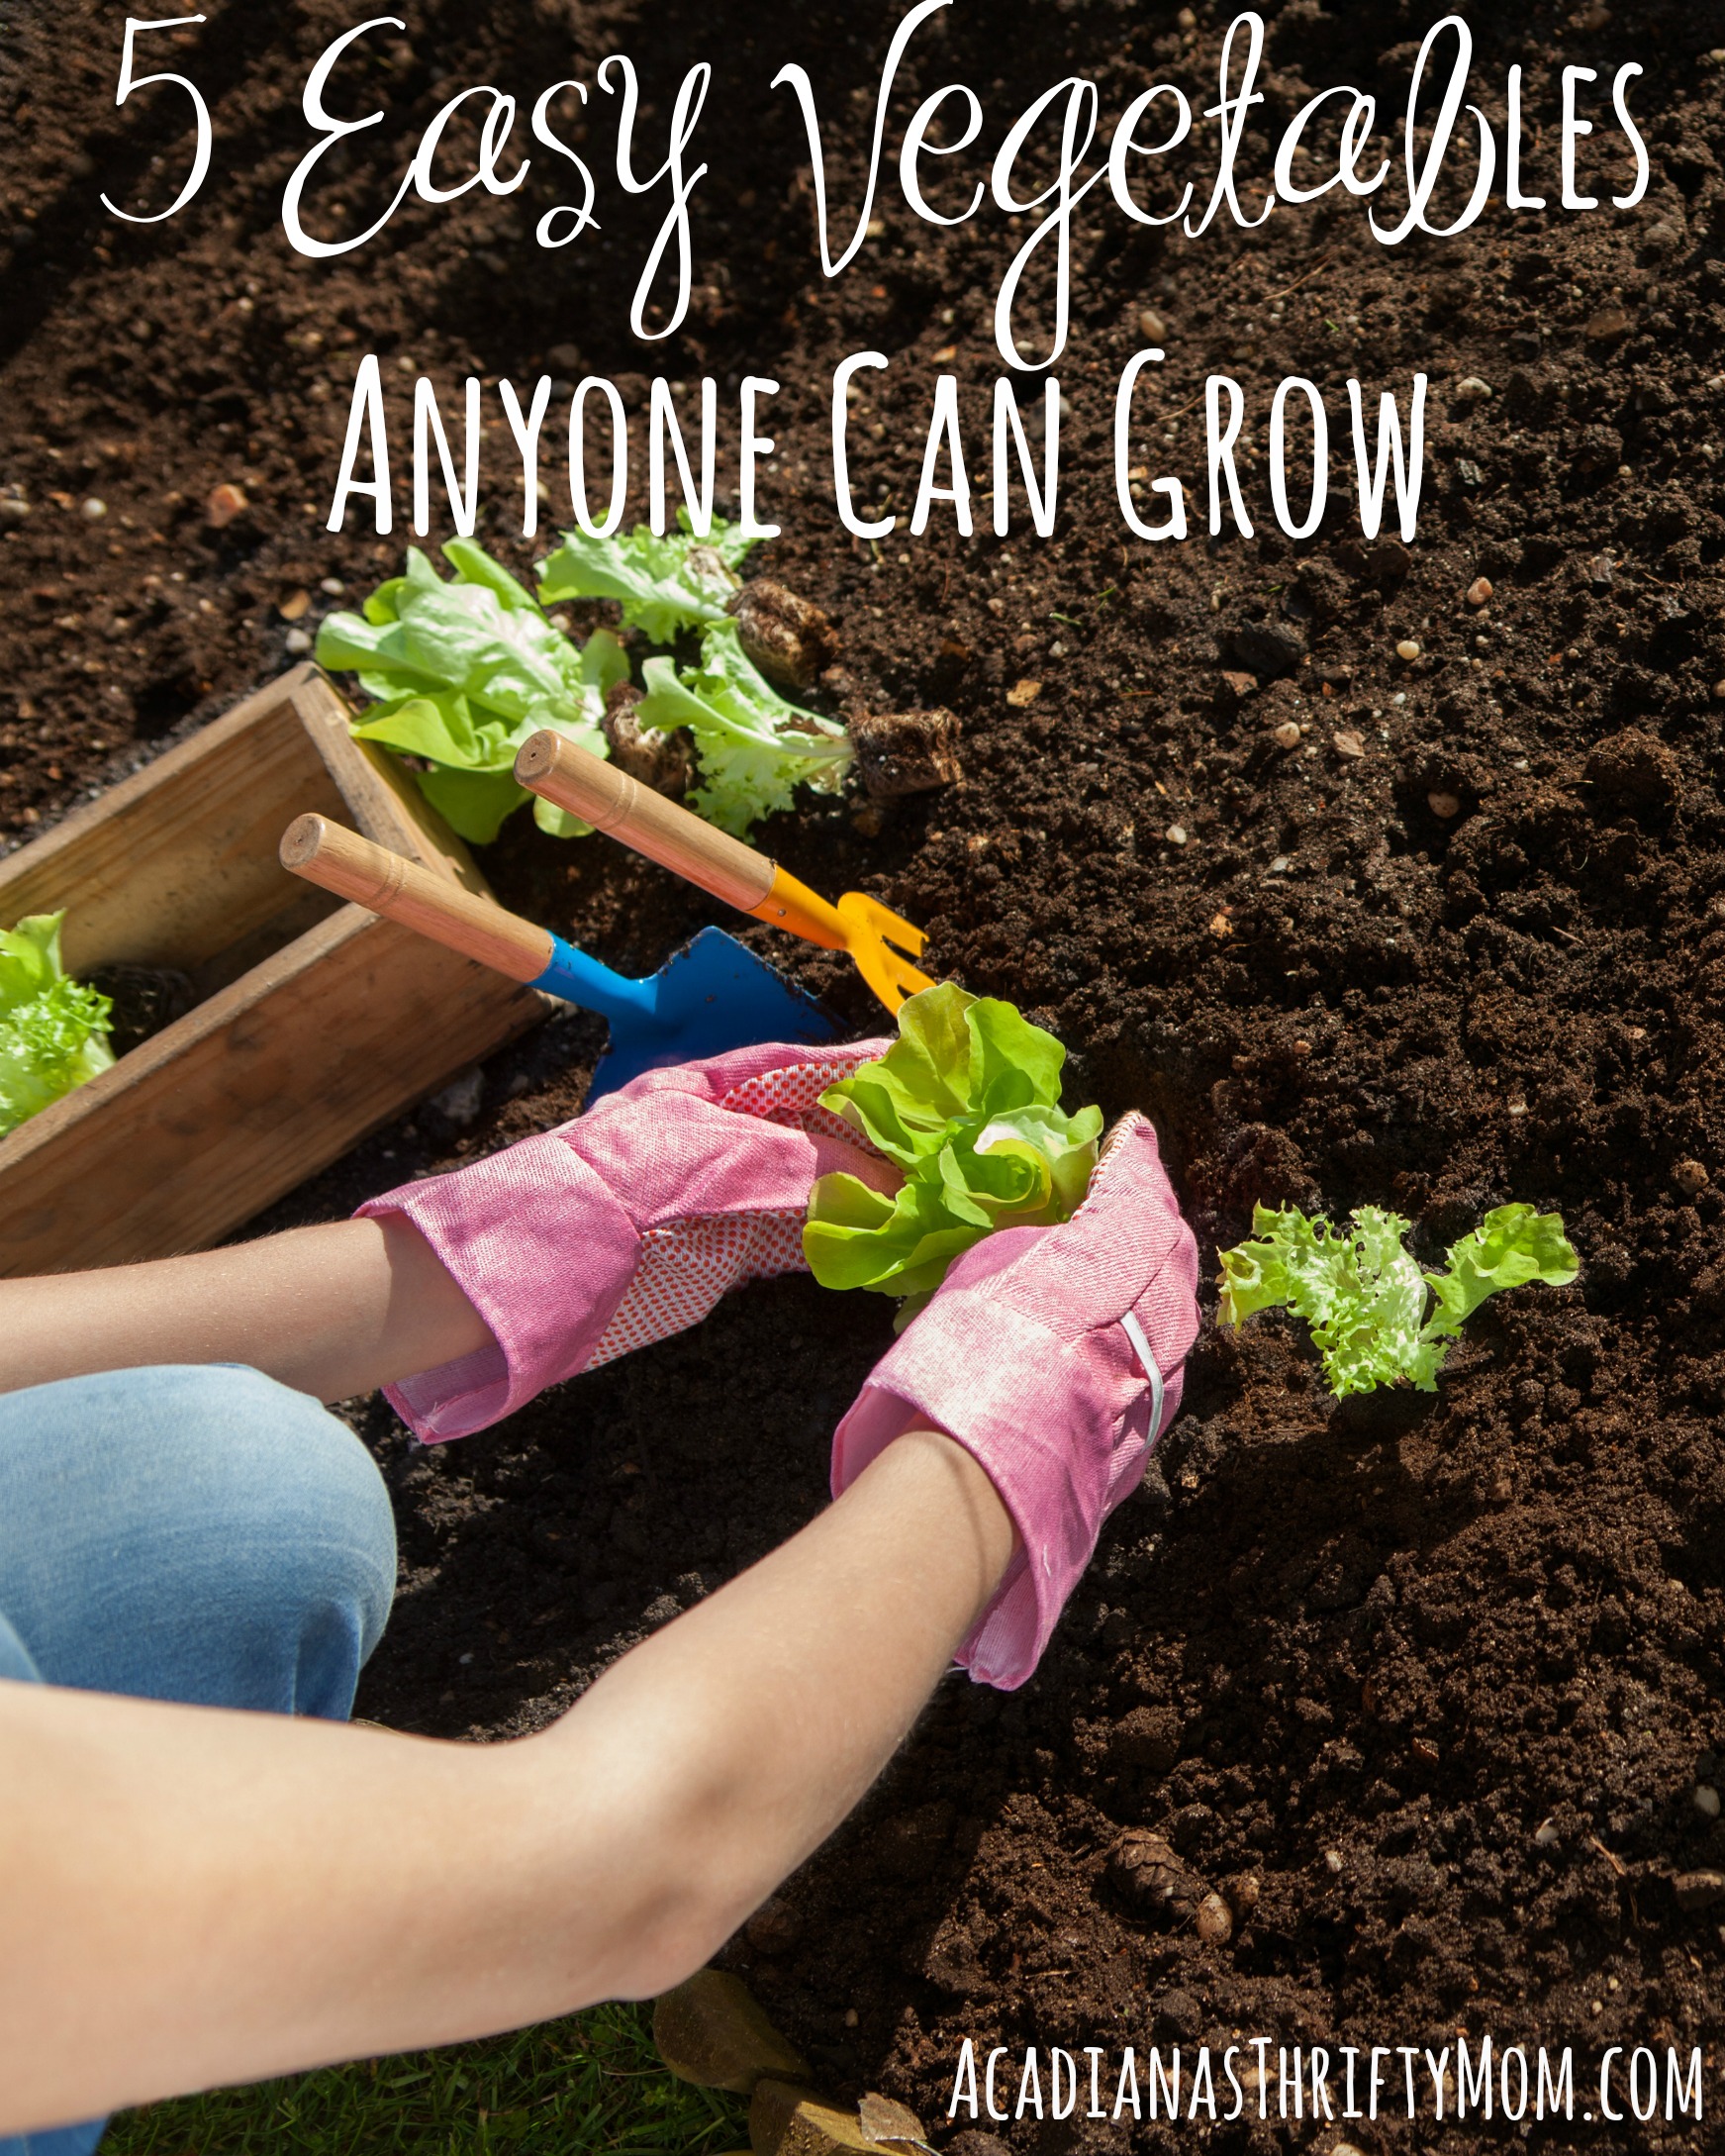 5 Easy Vegetables Anyone Can Grow